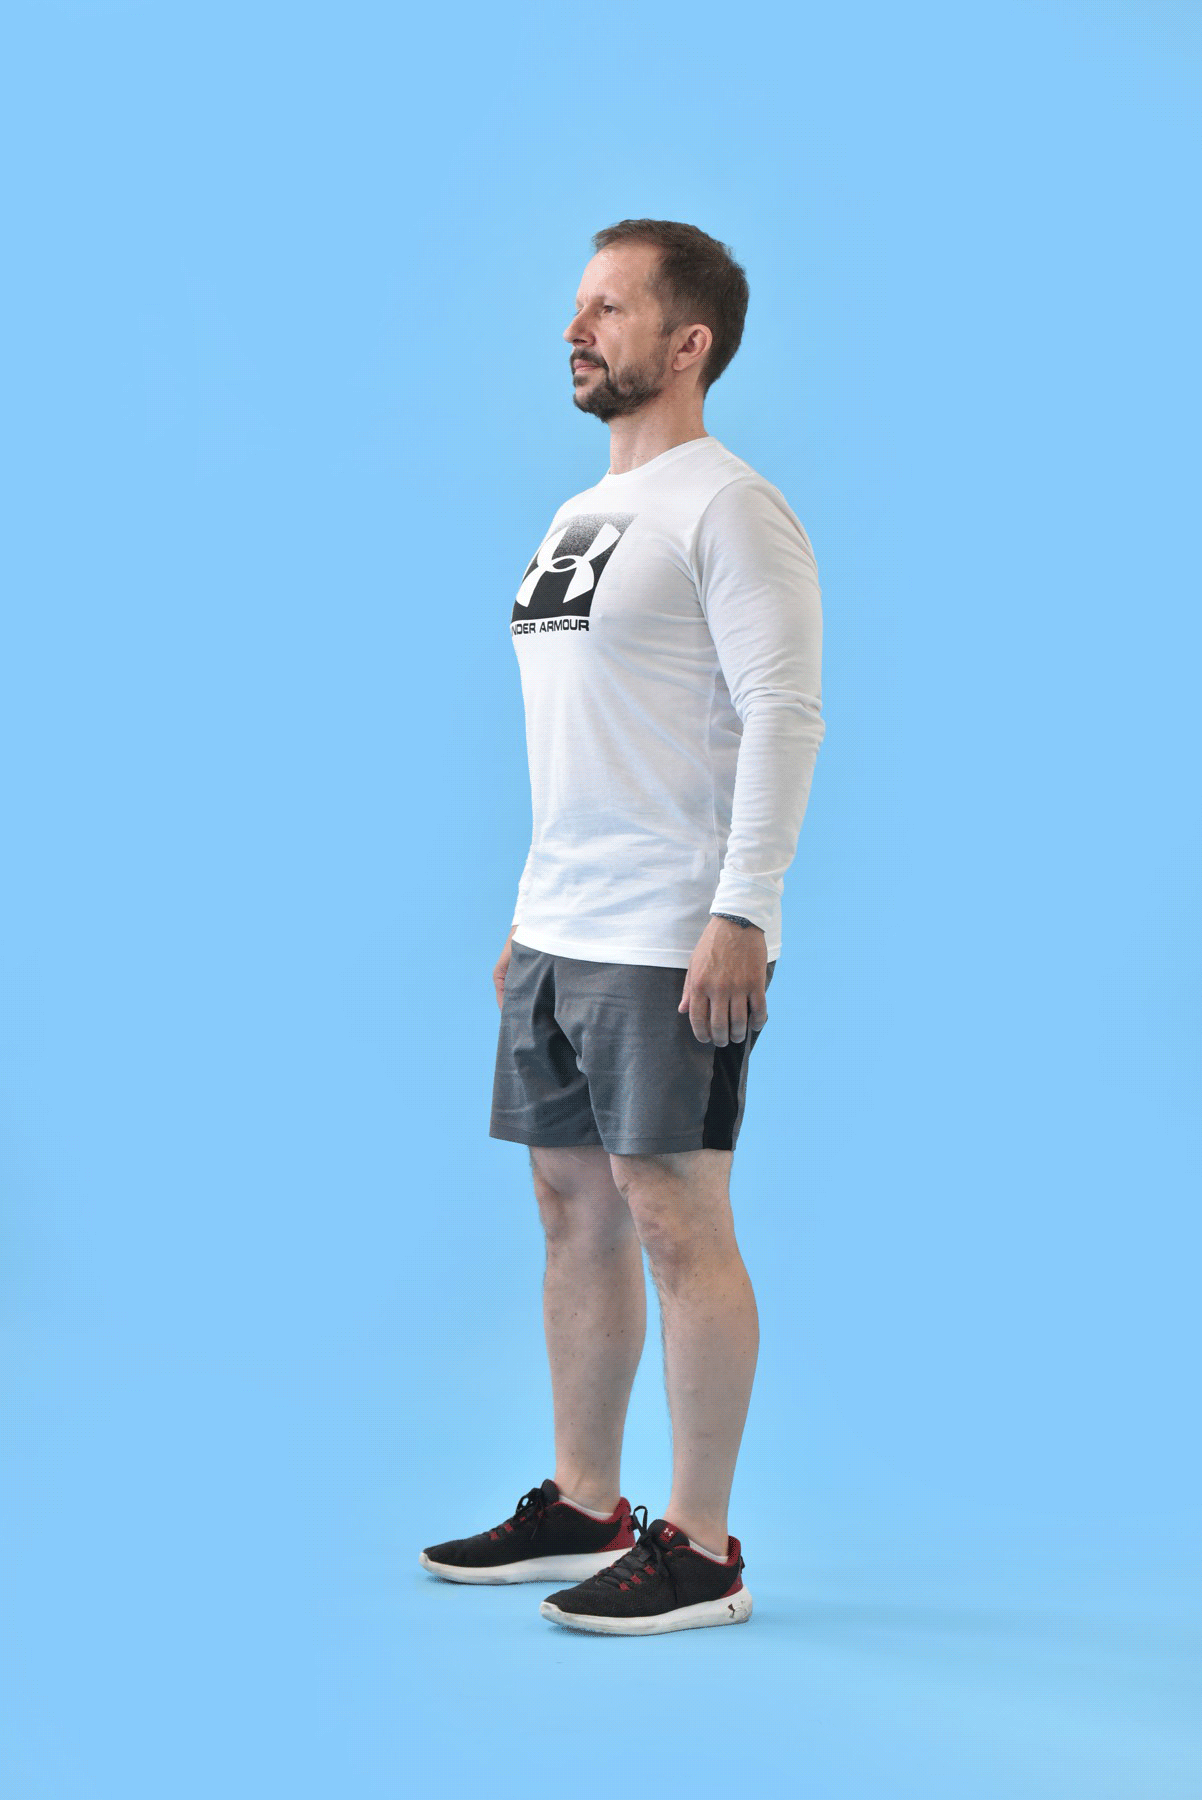 How To Do Bodyweight Squats Correctly